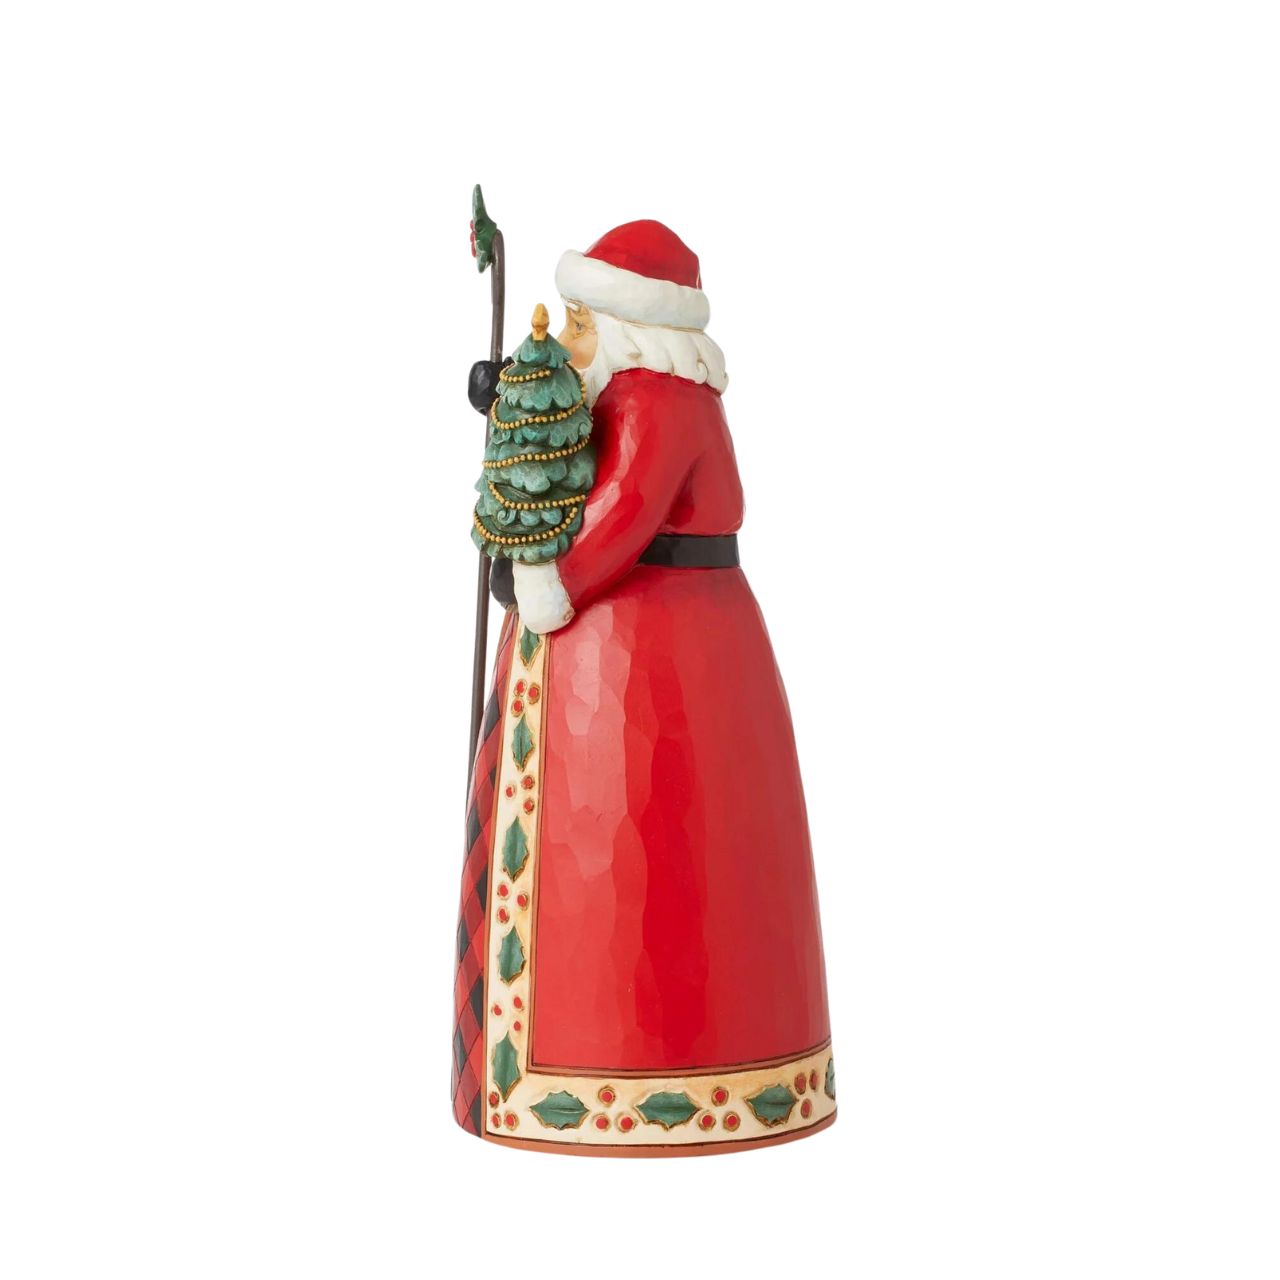 Heartwood Creek Highland Glen Santa Figurine  Designed by award winning artist Jim Shore as part of the Heartwood Creek Highland Glen Collection, hand crafted using high quality cast stone and hand painted, this festive Santa is perfect for the Christmas season.